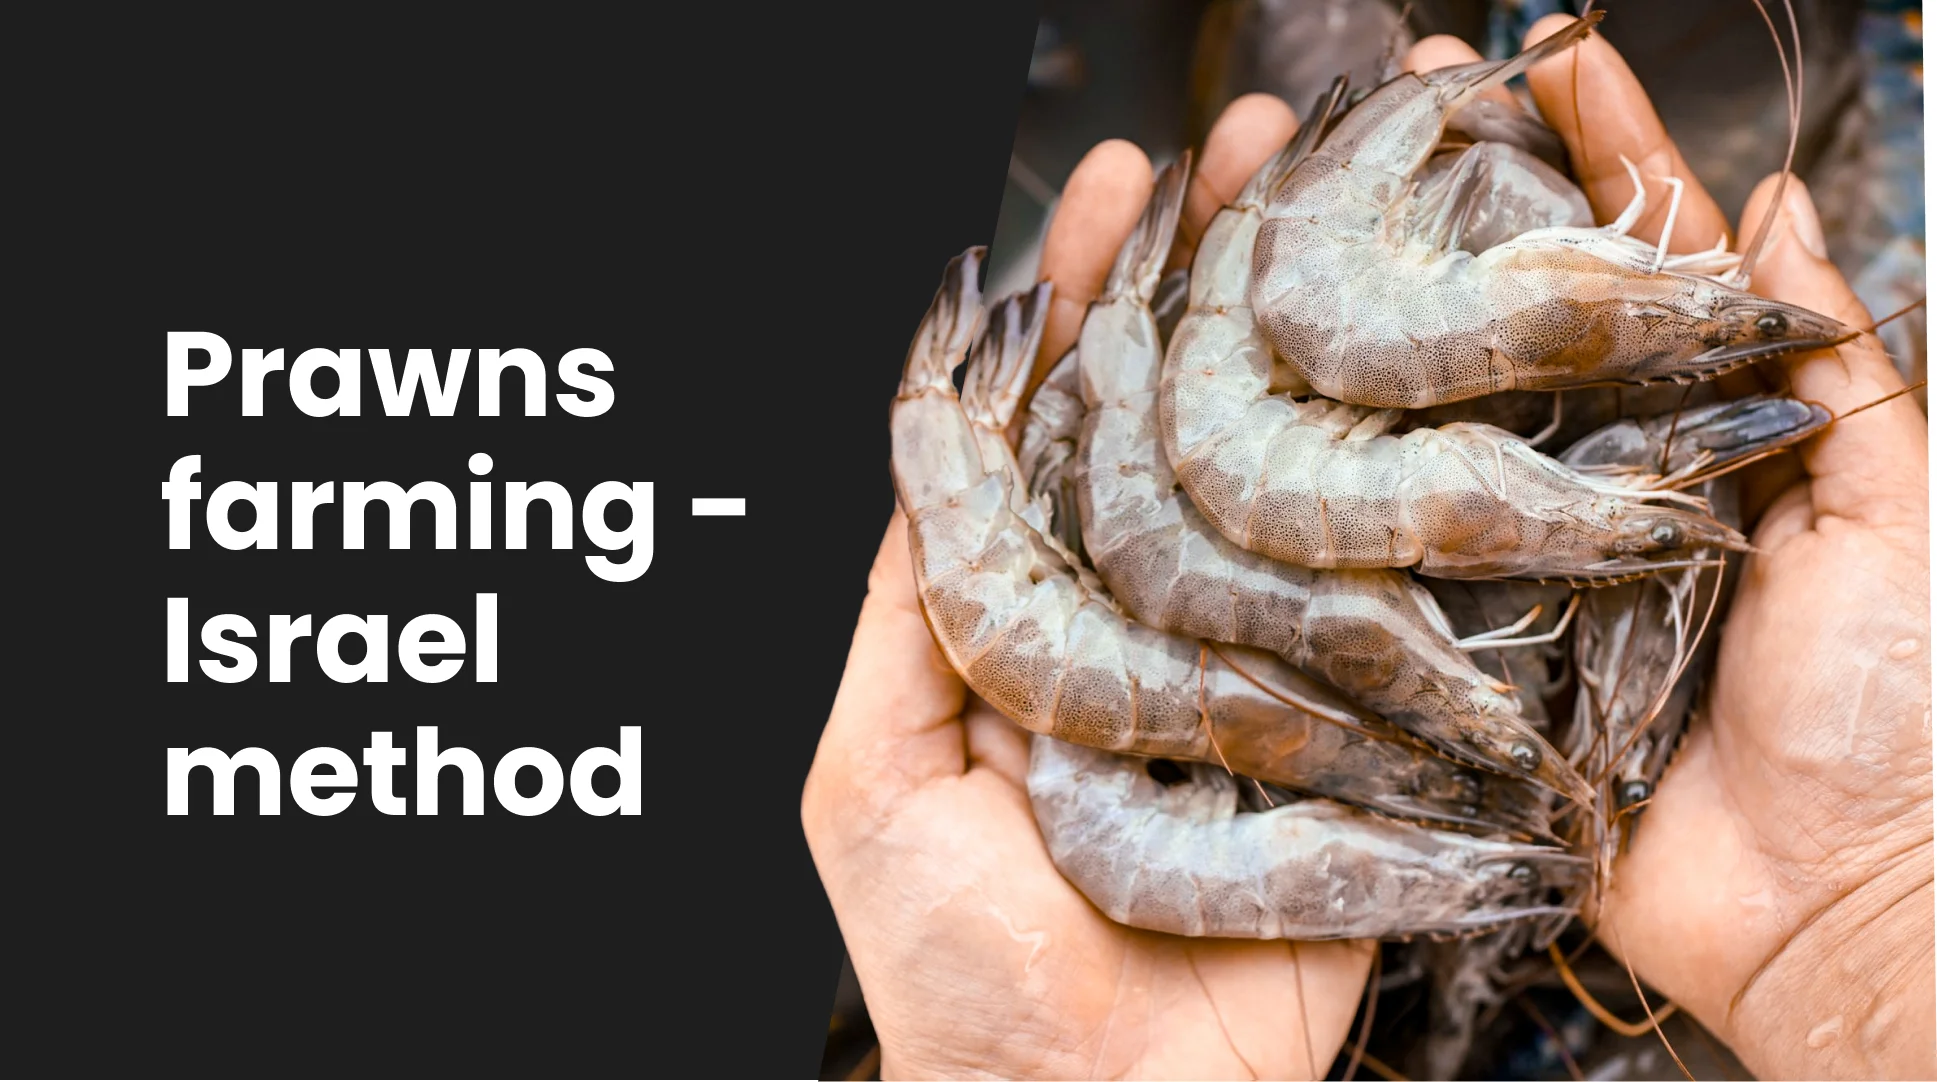 Course Trailer: Prawns Farming Course - Earn Upto 10 Lakh / Year. Watch to know more.